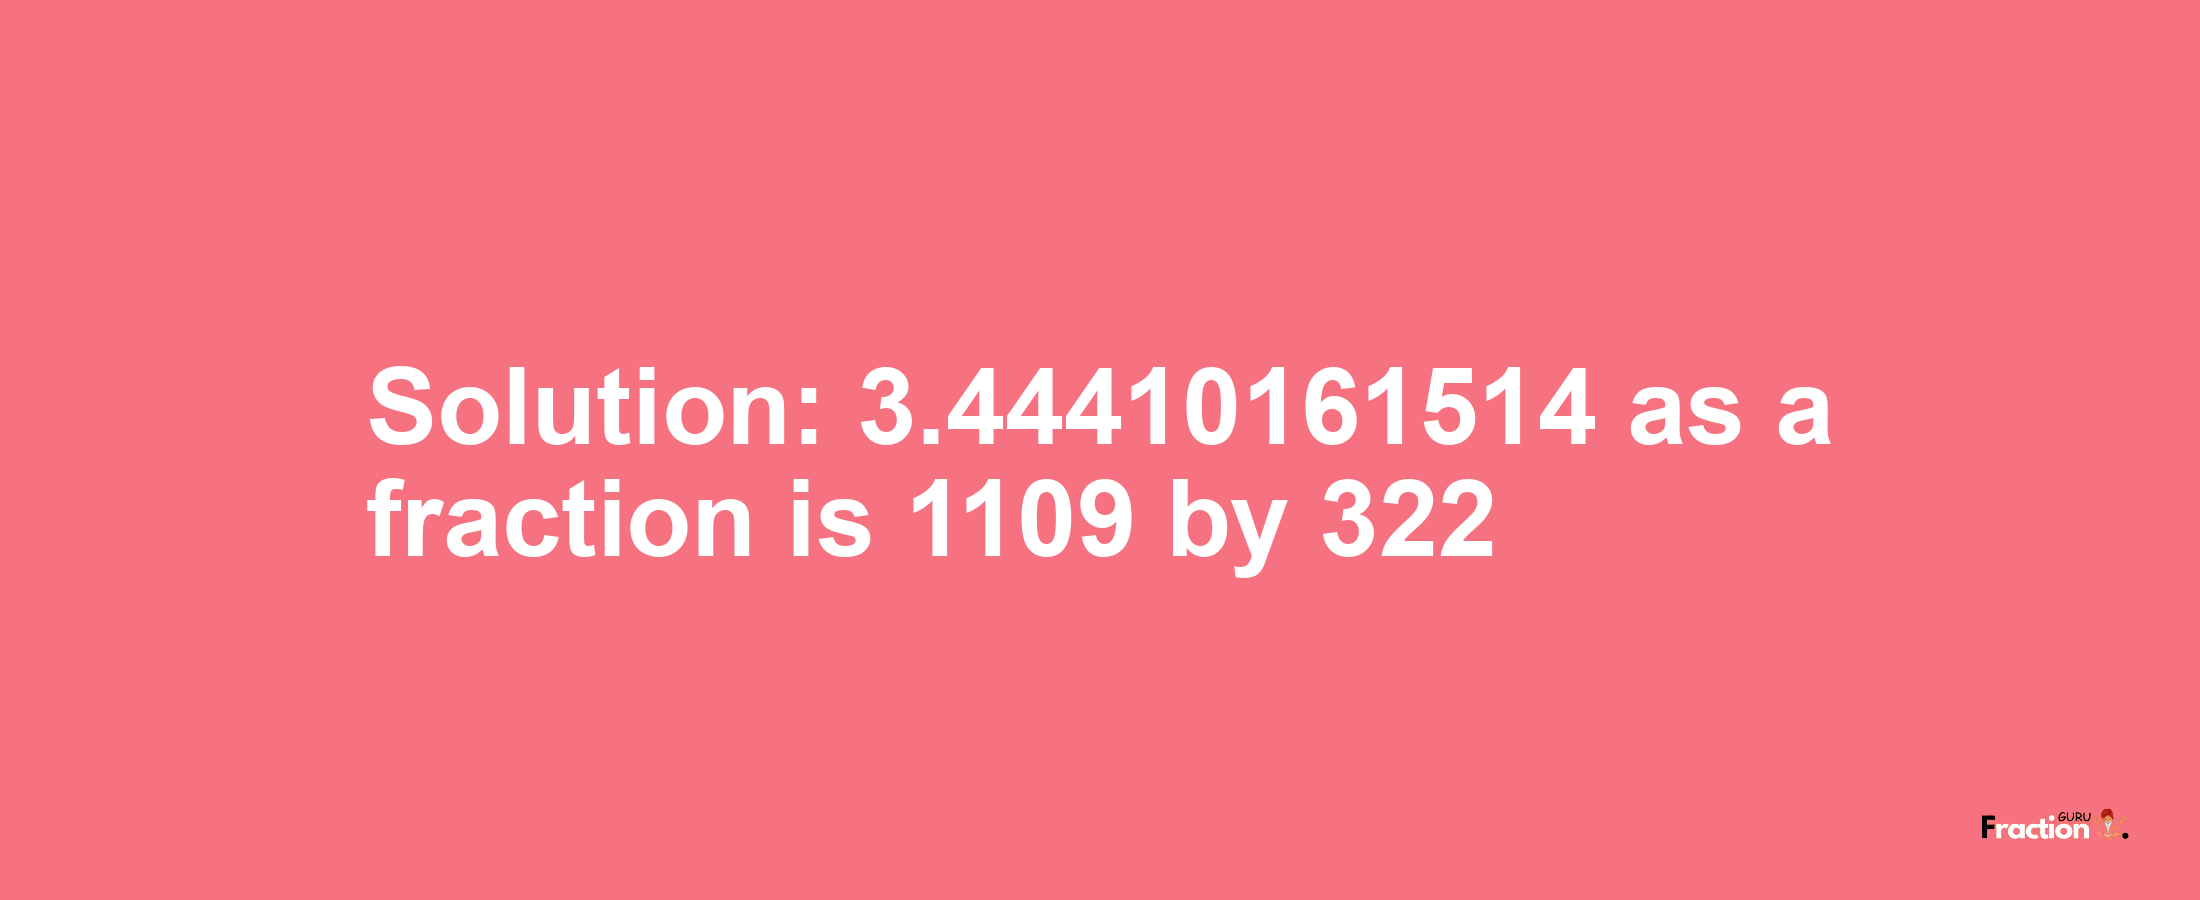 Solution:3.44410161514 as a fraction is 1109/322